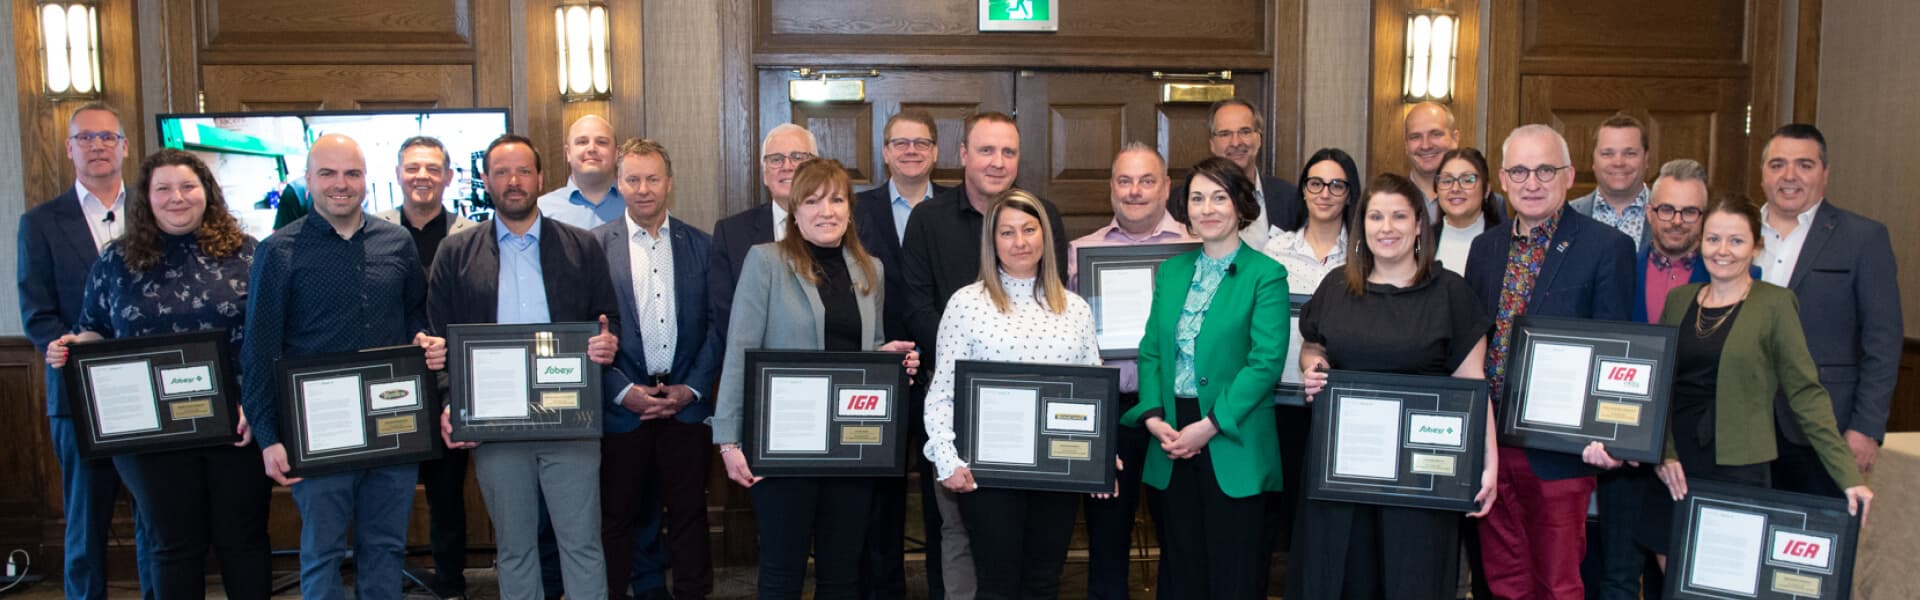 An Image of Sobeys team standing with their certificates.